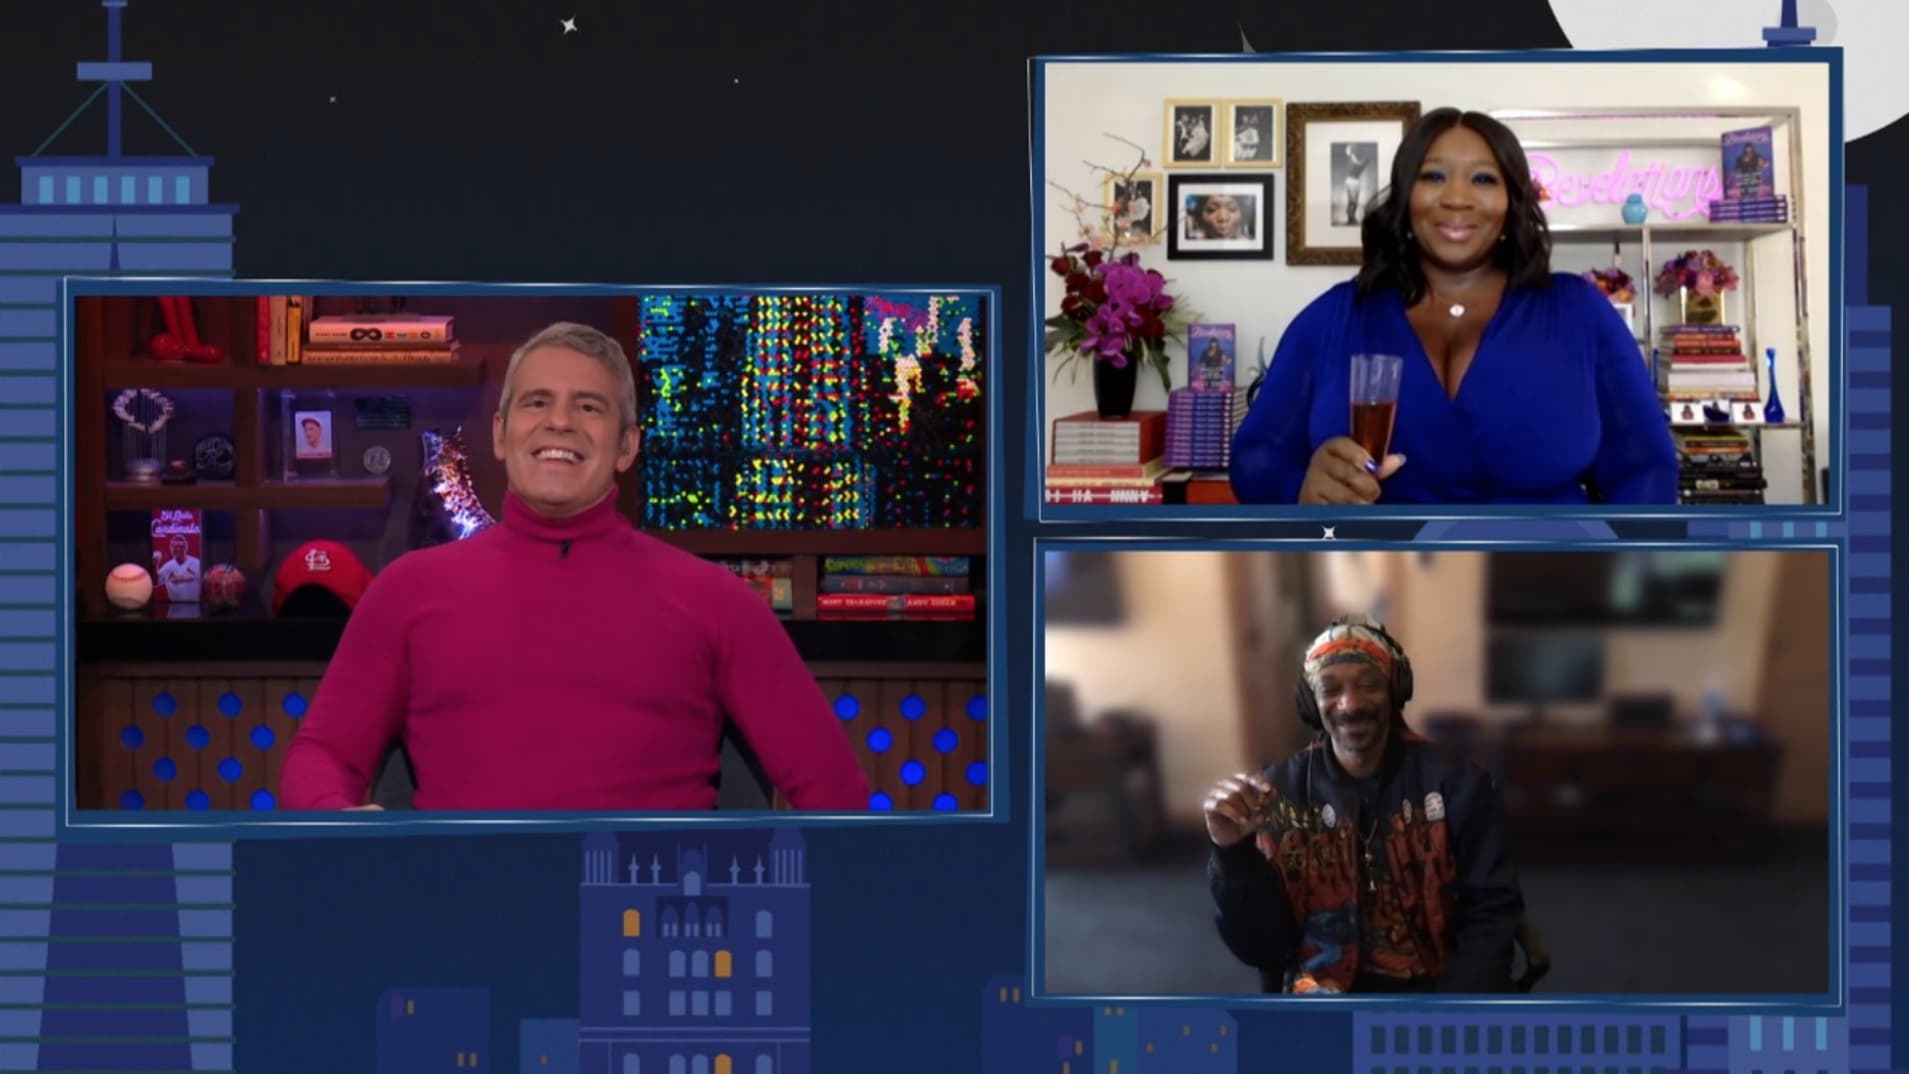 Watch What Happens Live with Andy Cohen Staffel 18 :Folge 11 